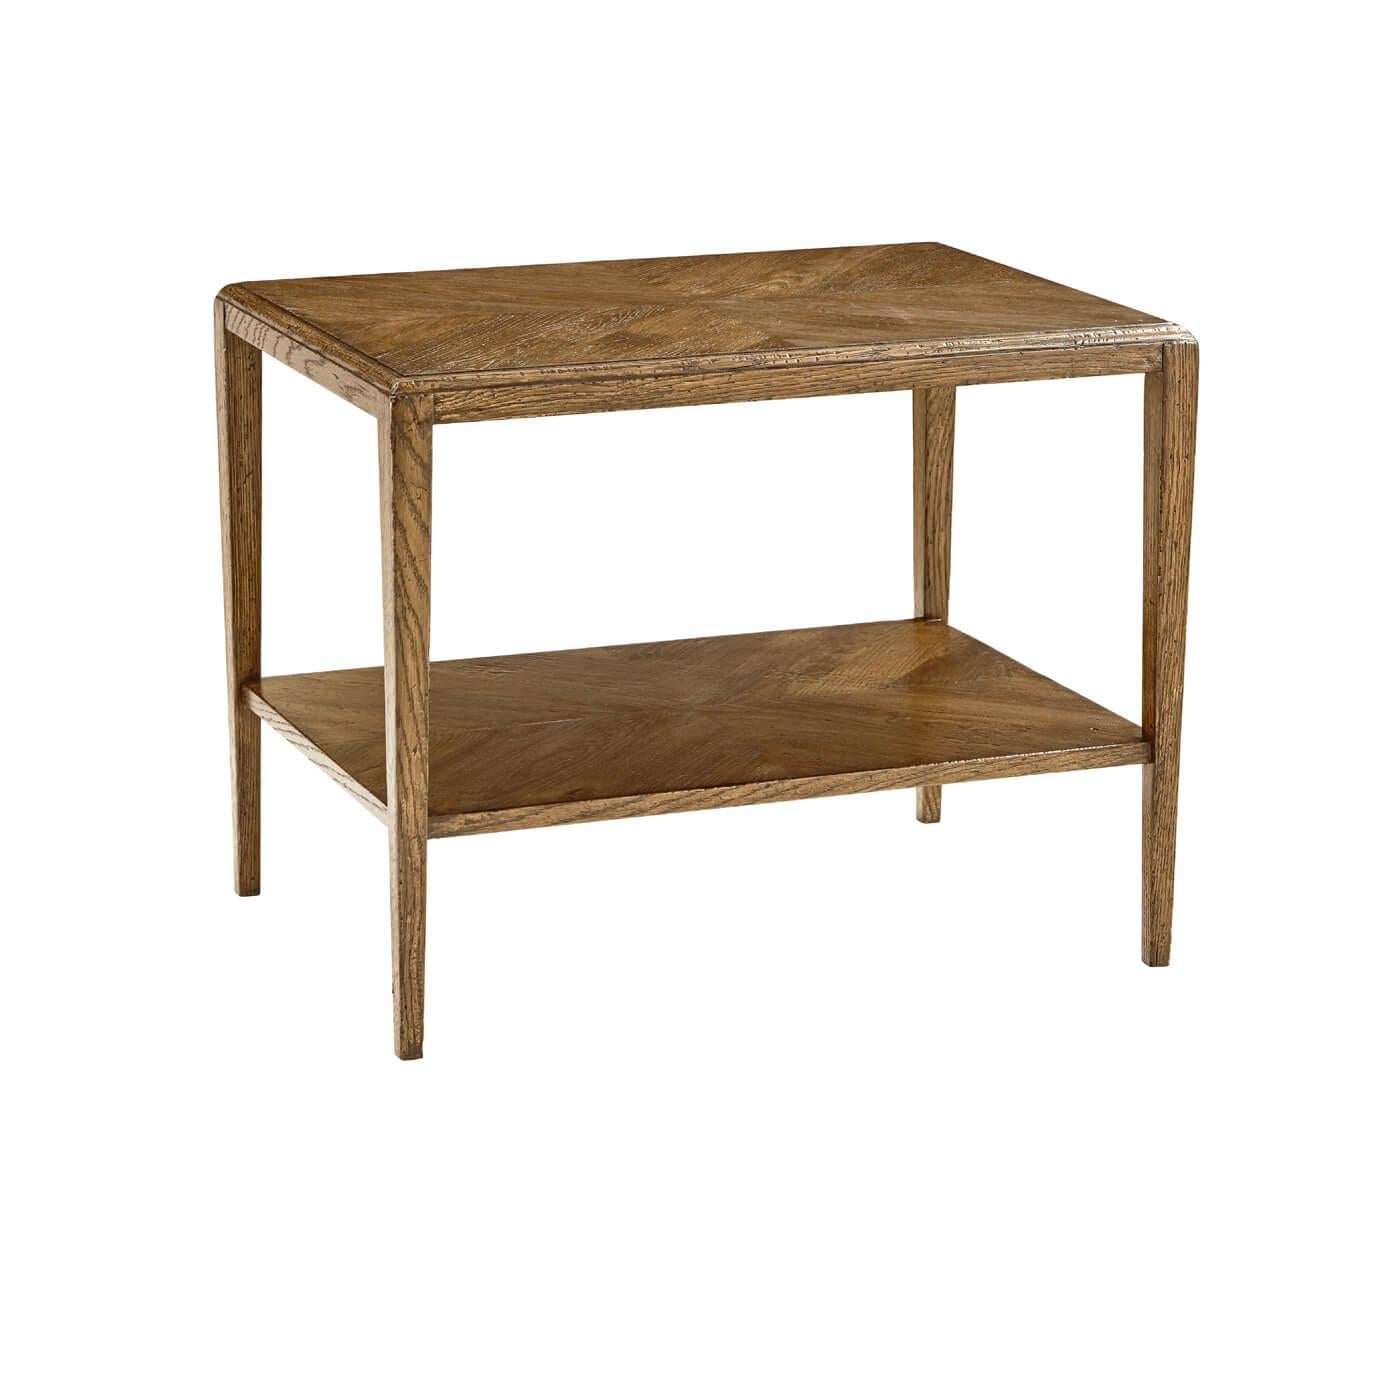 A rustic oak parquetry side table with rustic tapered oak legs. This beautiful rectangular shape table has a parquetry patterned top and bottom tier. 

Shown in dawn finish.
Dimensions: 28